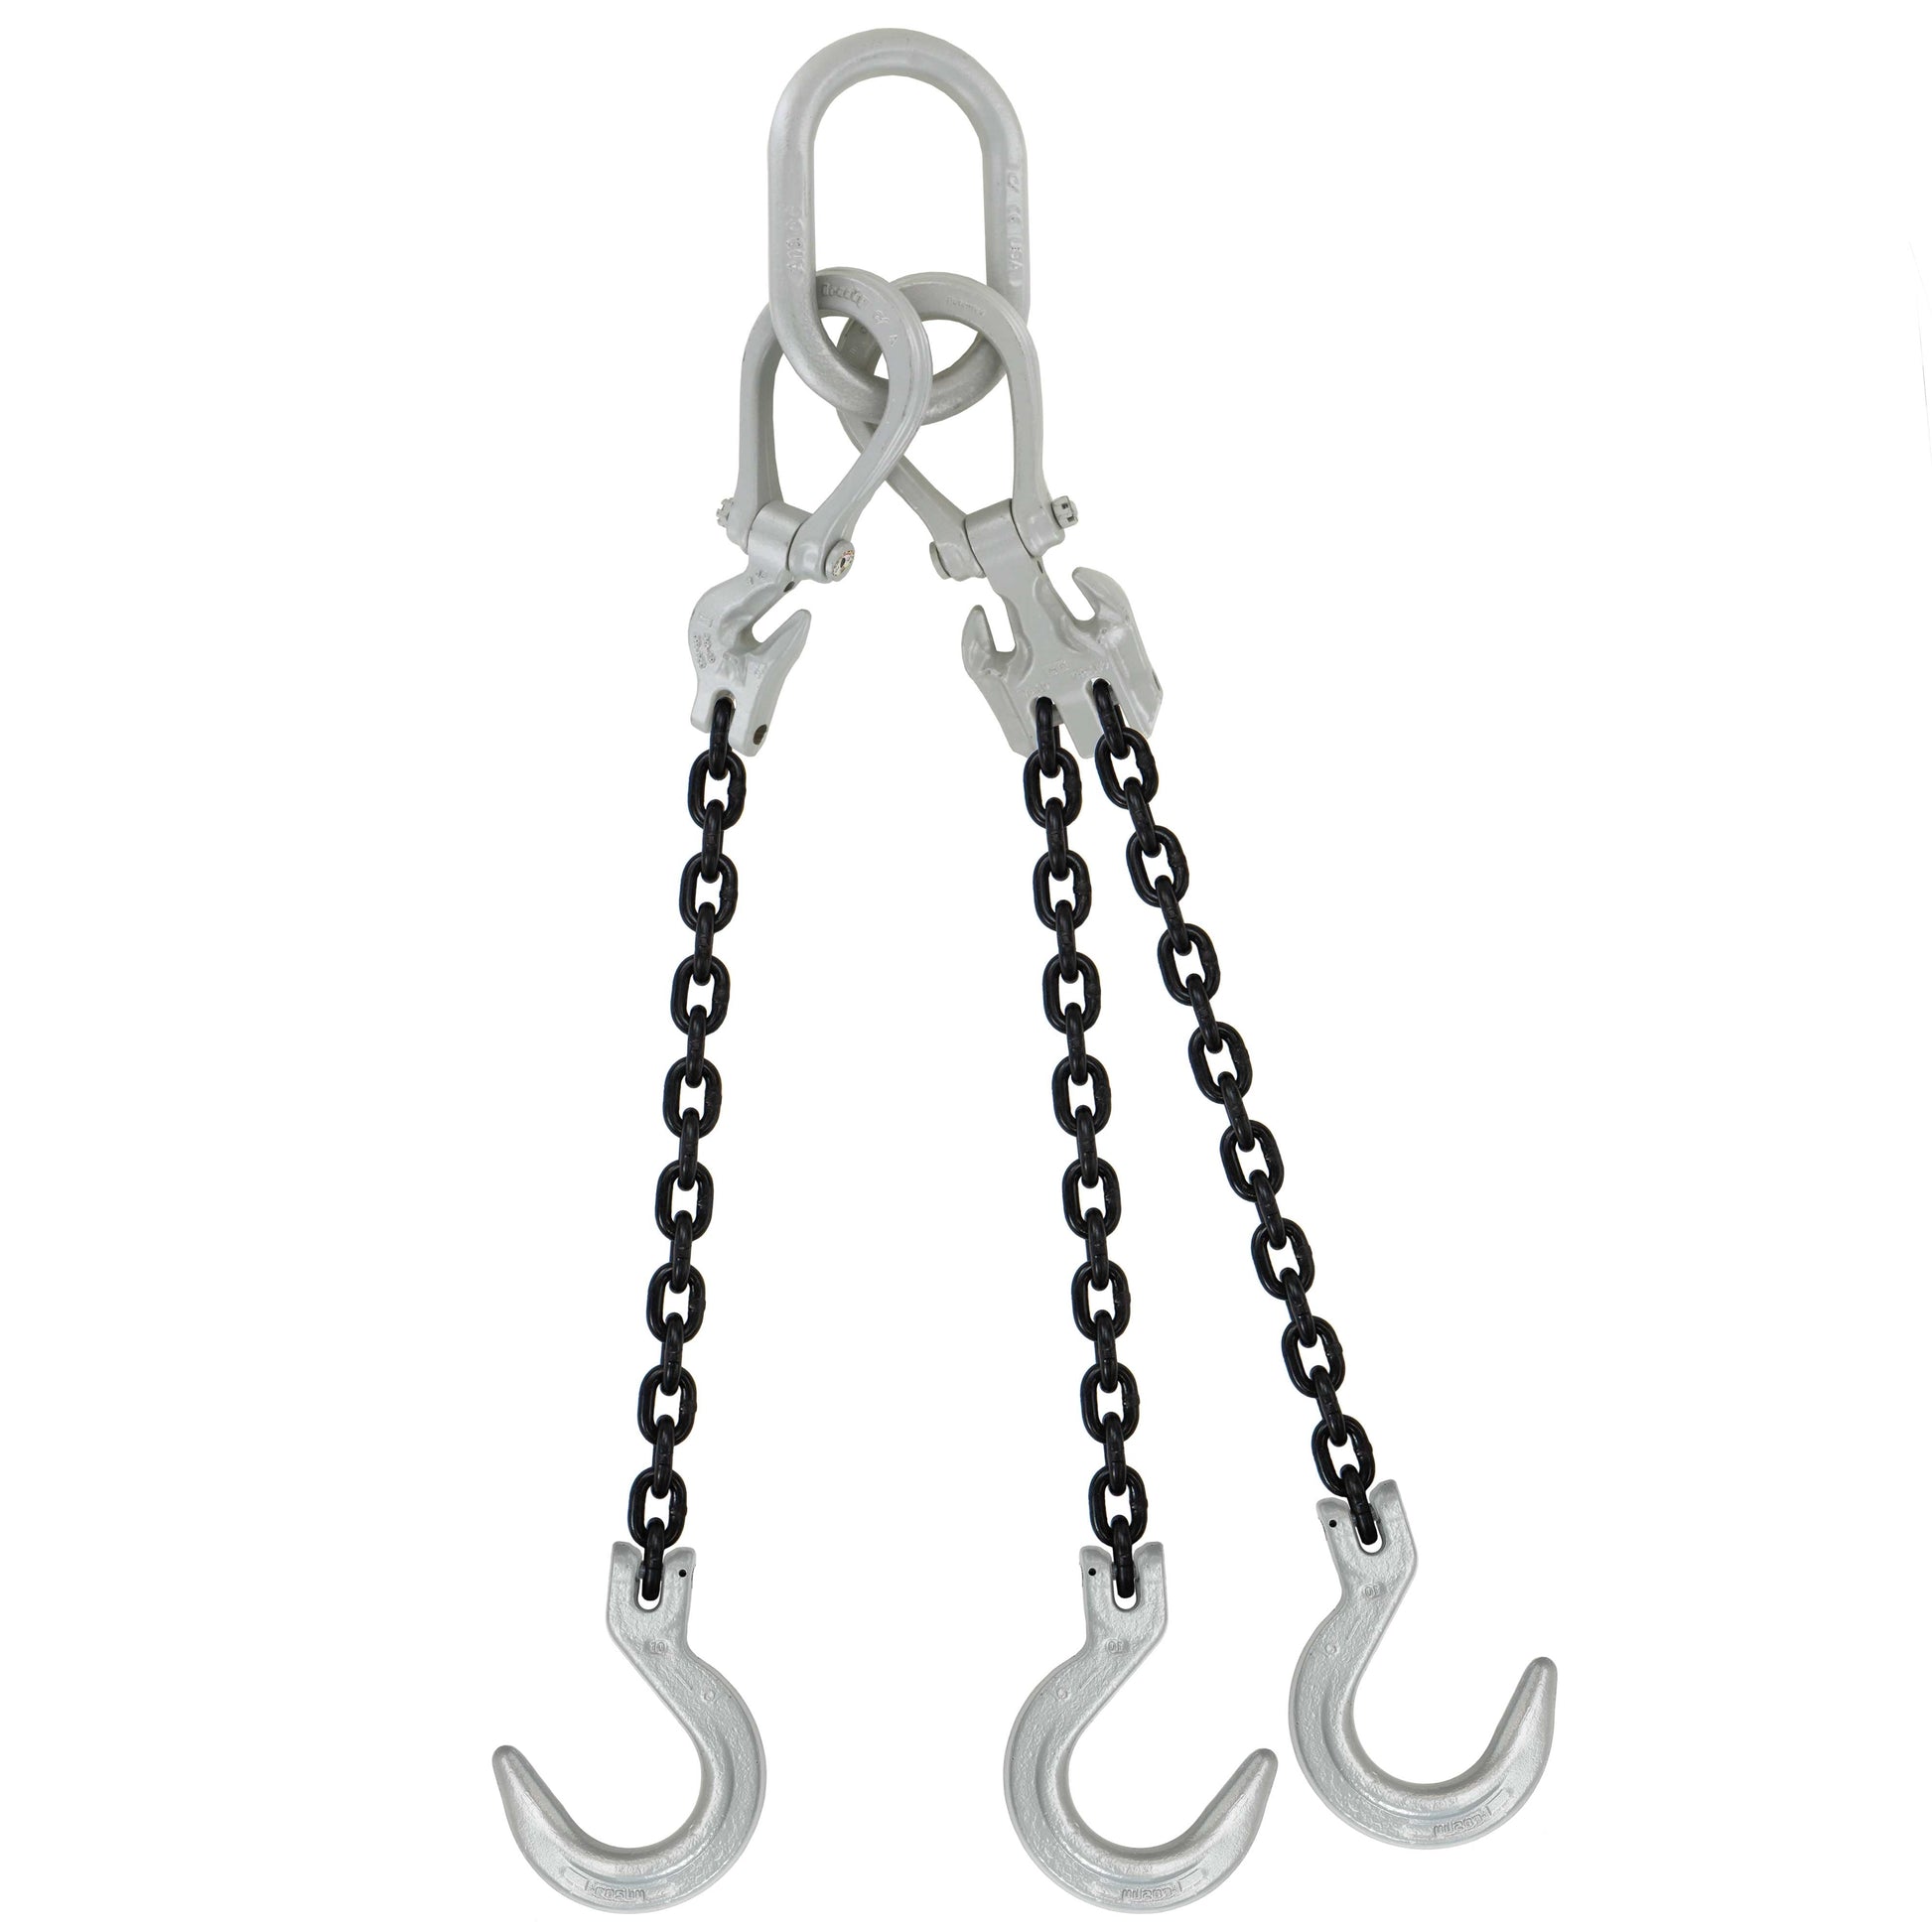 38 inch x 15 foot Domestic Adjustable 3 Leg Chain Sling w Crosby Foundry Hooks Grade 100 image 1 of 2